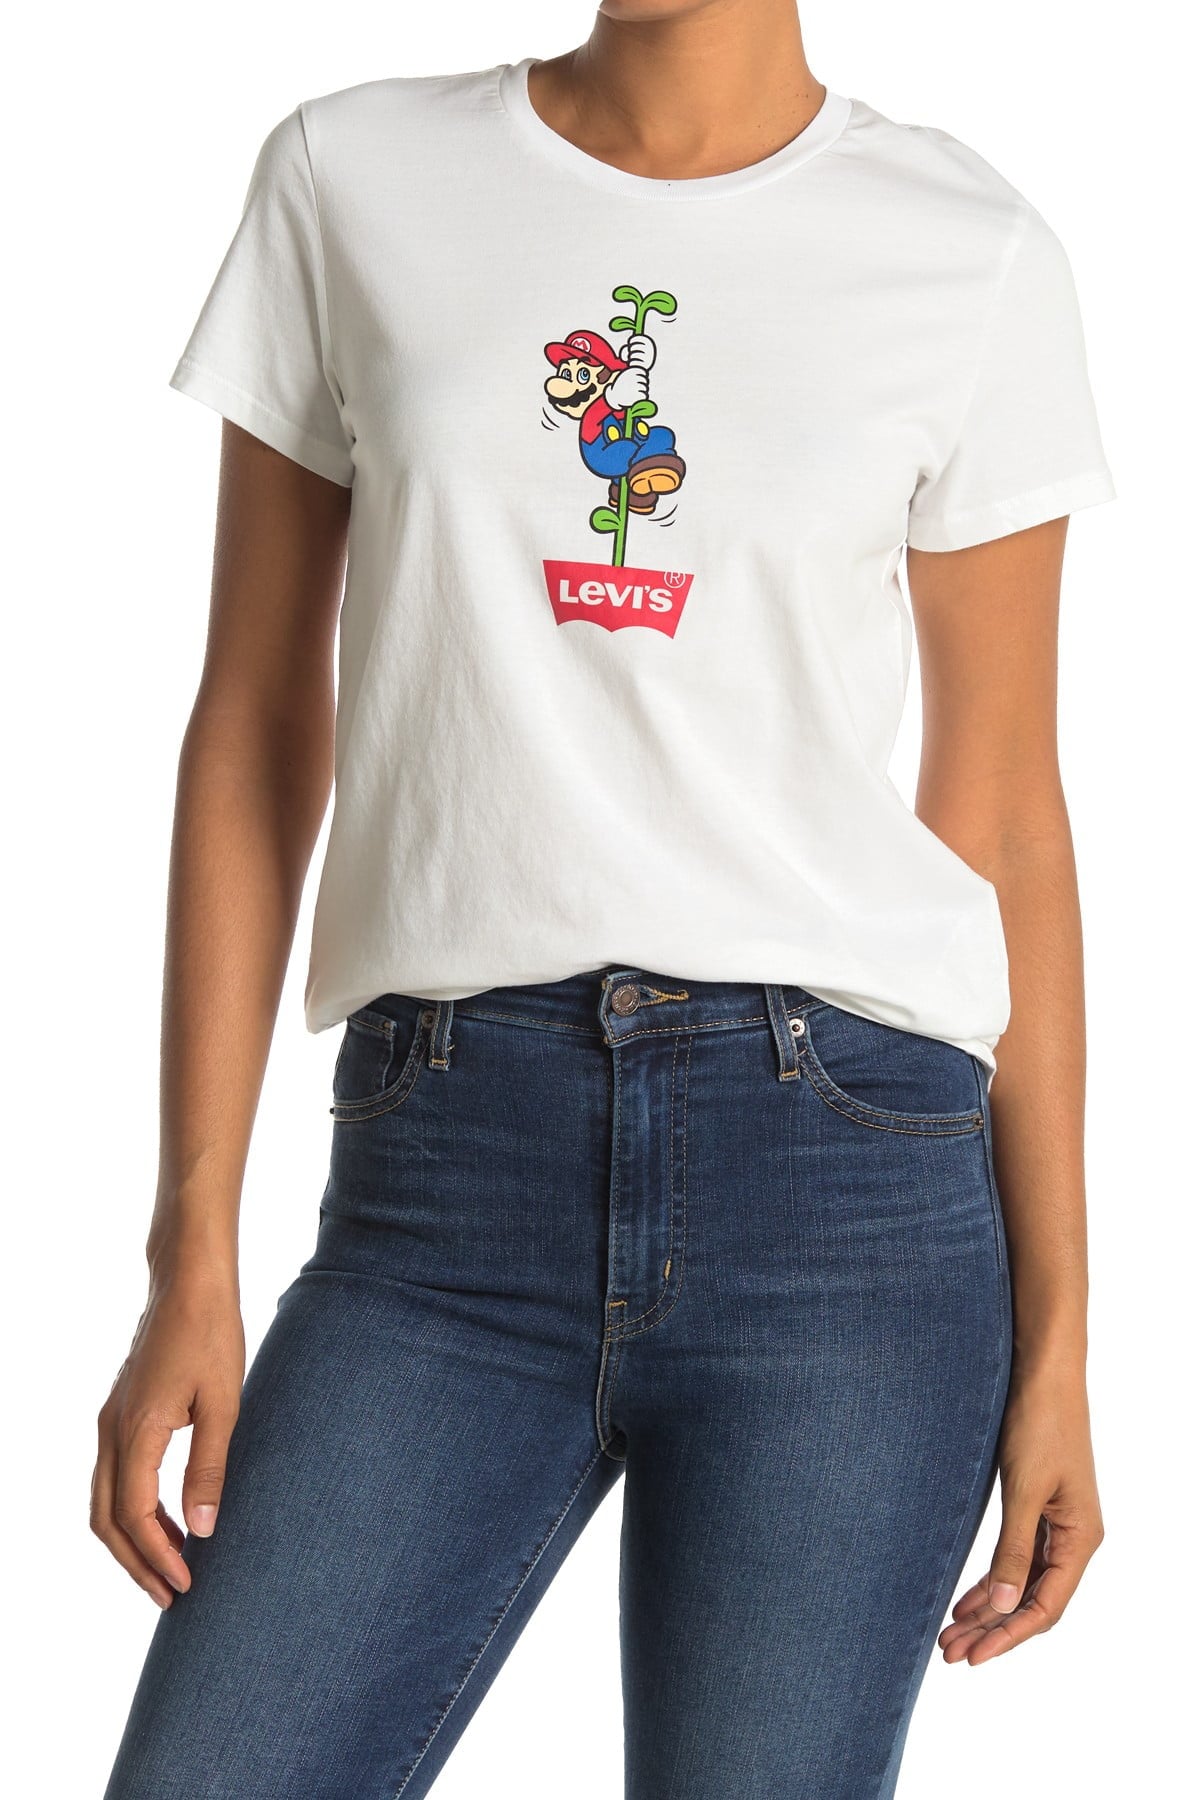 Levi's Super Mario Graphic T-Shirt | 25 Pieces People Will Never Guess You  Got From Nordstrom Rack | POPSUGAR Fashion Photo 25